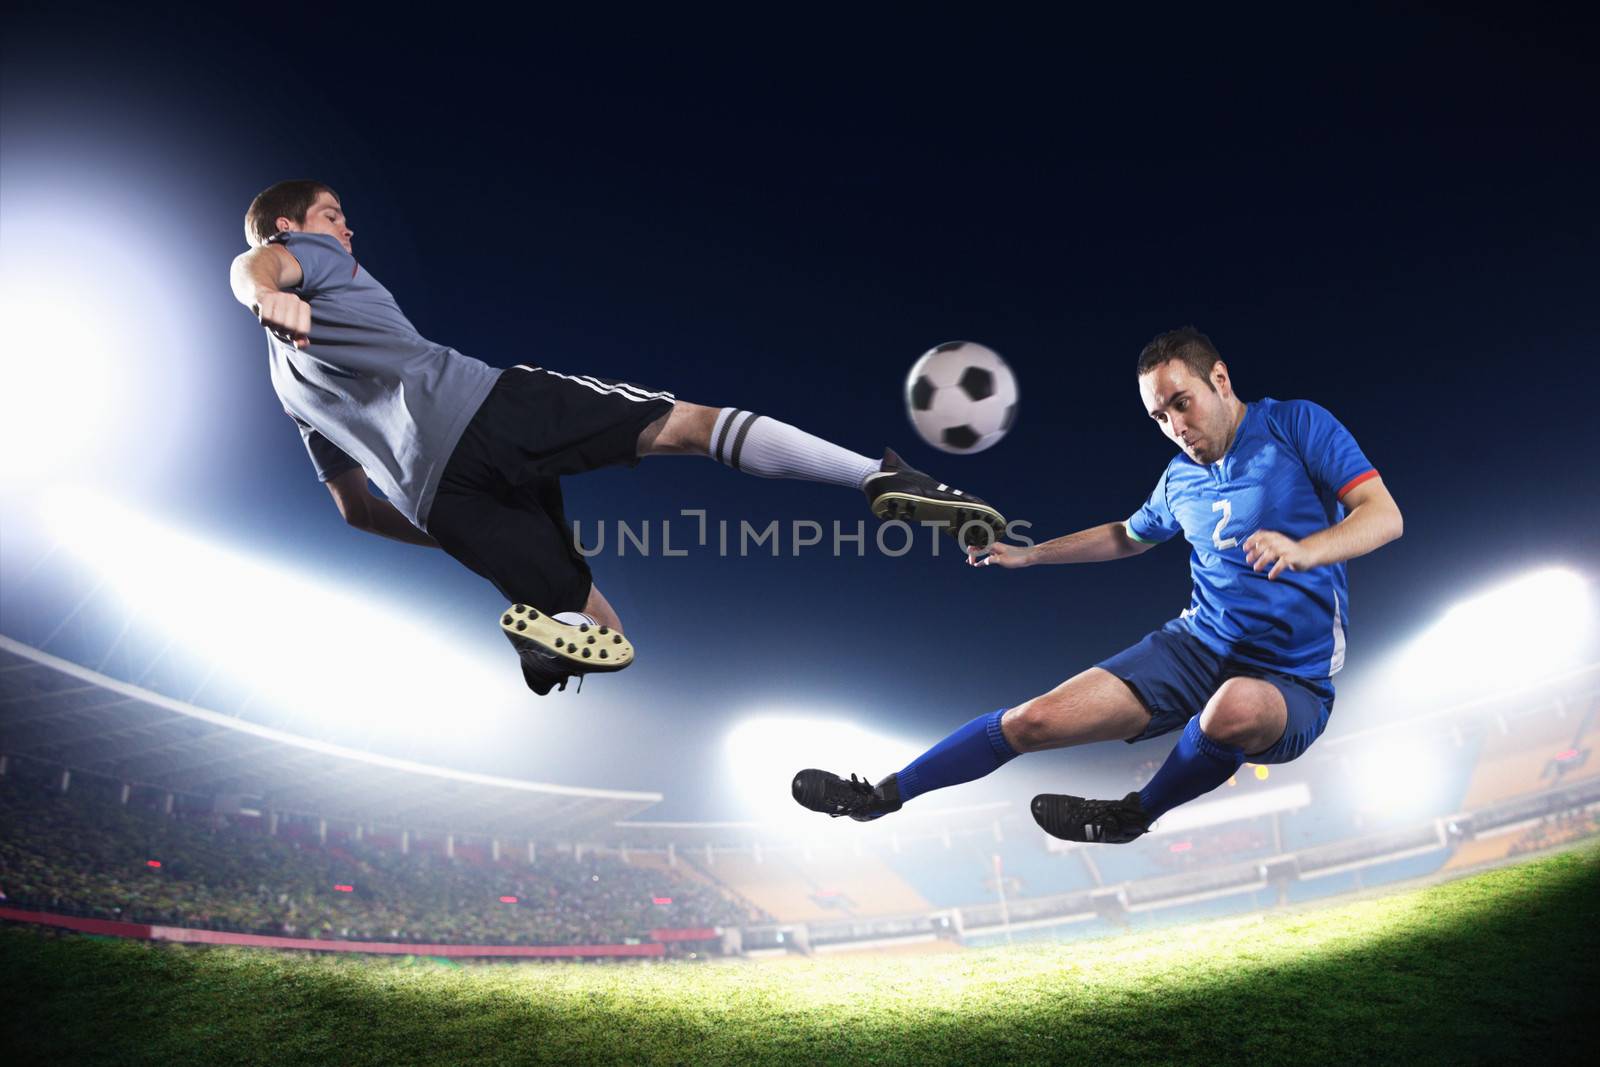 Two soccer players in mid air kicking the soccer ball, stadium lights at night in background